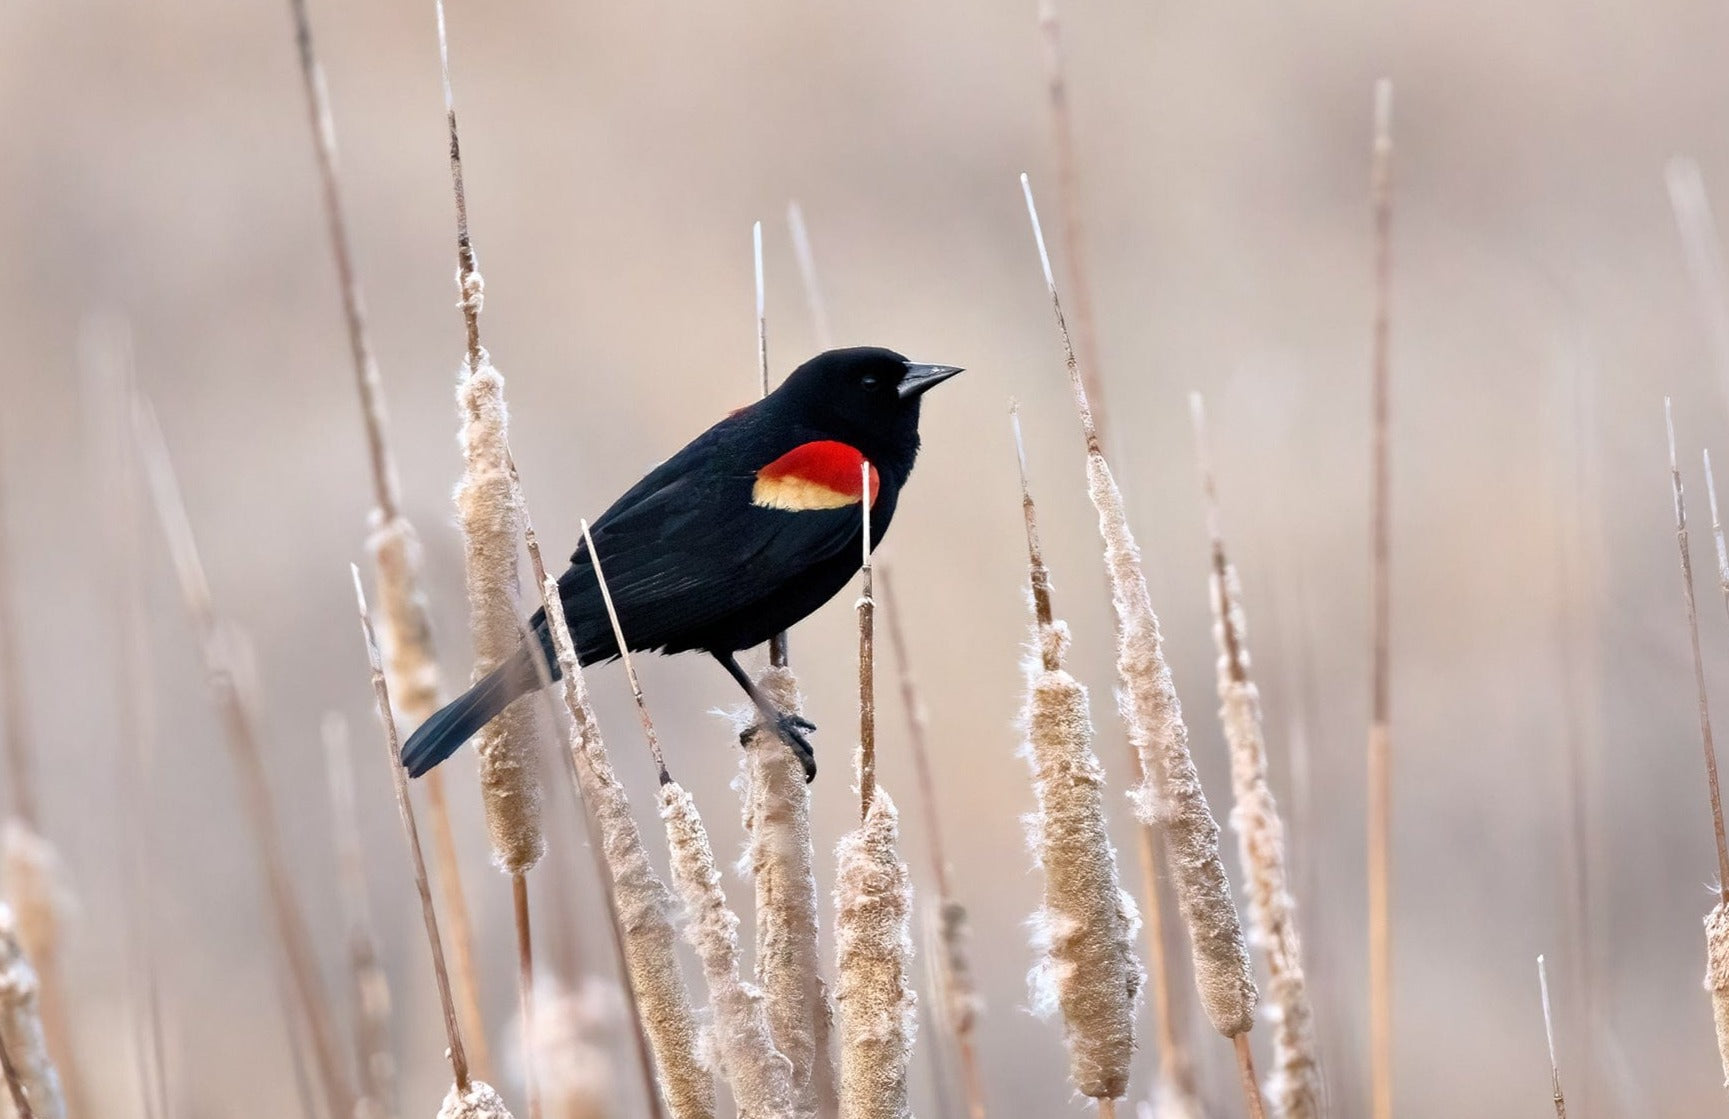 Red-Winged Blackbird on Cattails Paper Photo Print / 12 x 18 Inches Wall Art Teri James Photography